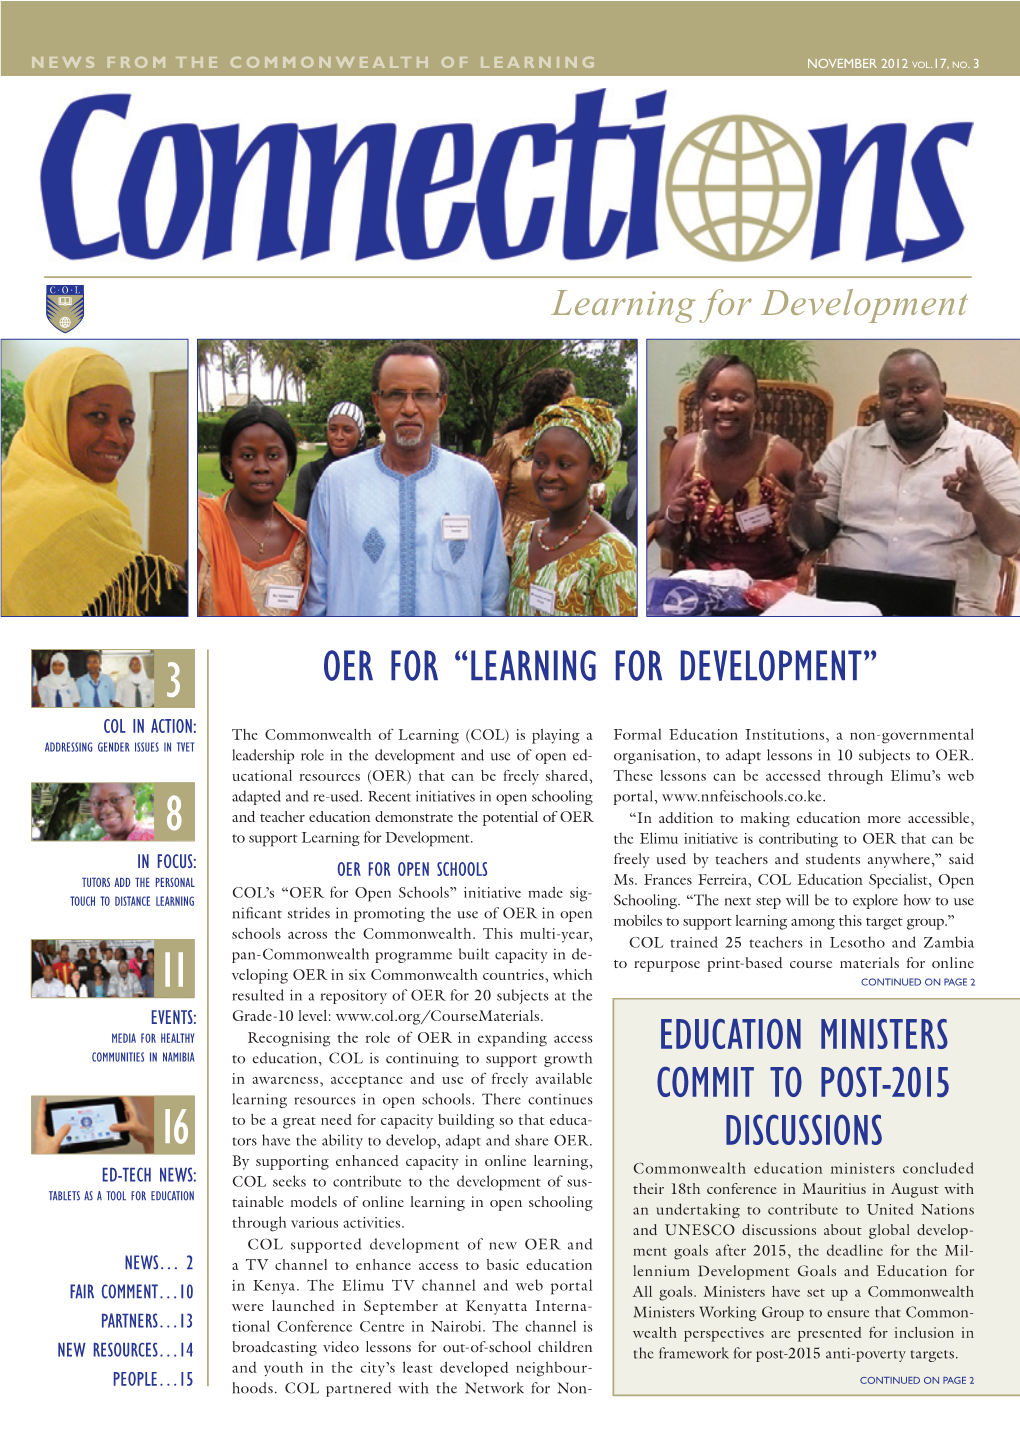 Education Ministers Commit to Post-2015 Discussions Oer for “Learning for Development”